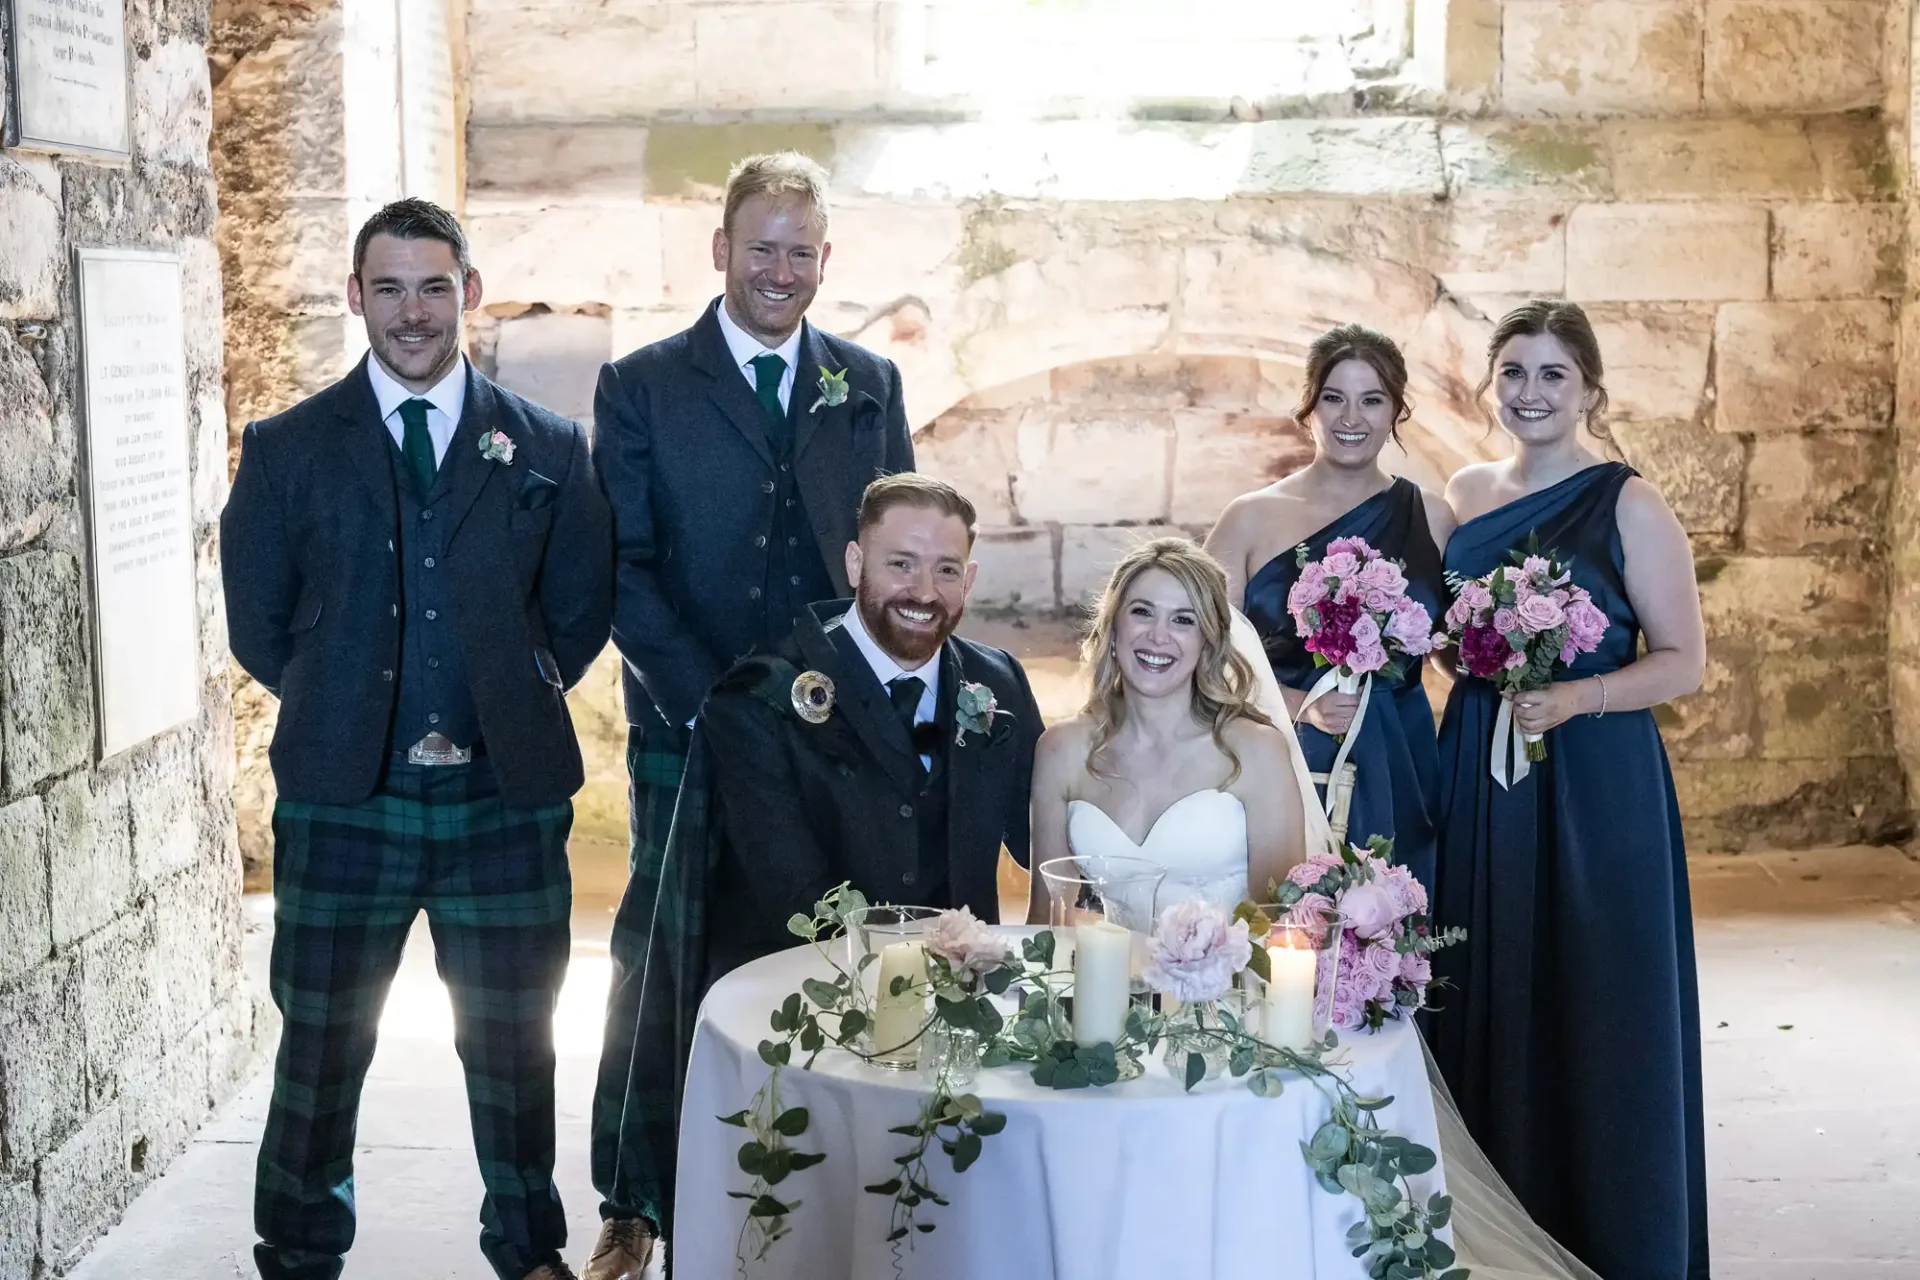 Three men and three women dressed elegantly, with two in tartan kilts, smiling around a table decorated with flowers inside a stone building.